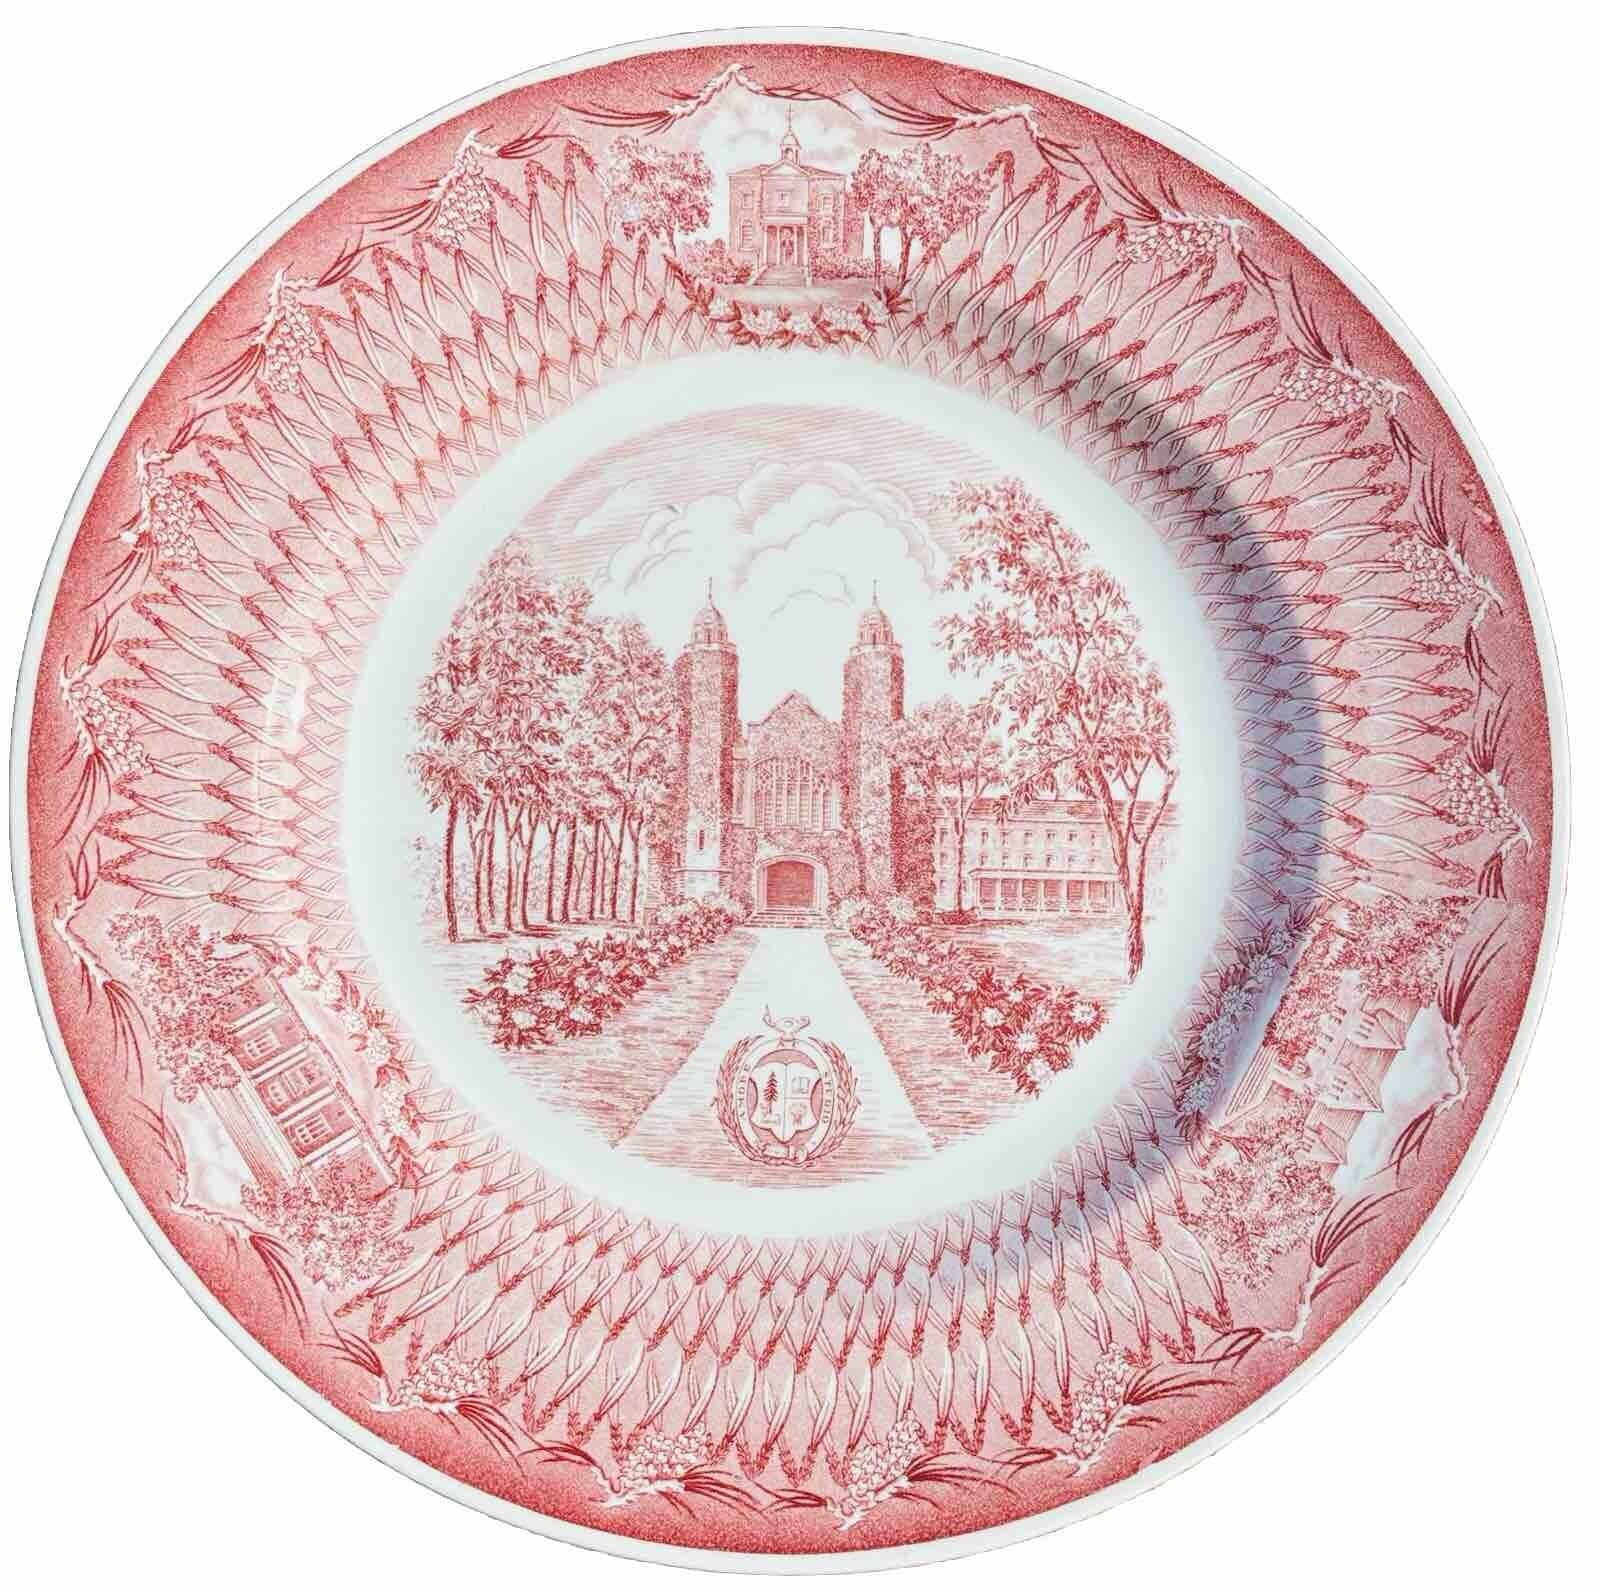 10” RED & WHITE (THE CHAPEL BATES COLLEGE BY WEDGEWOOD)